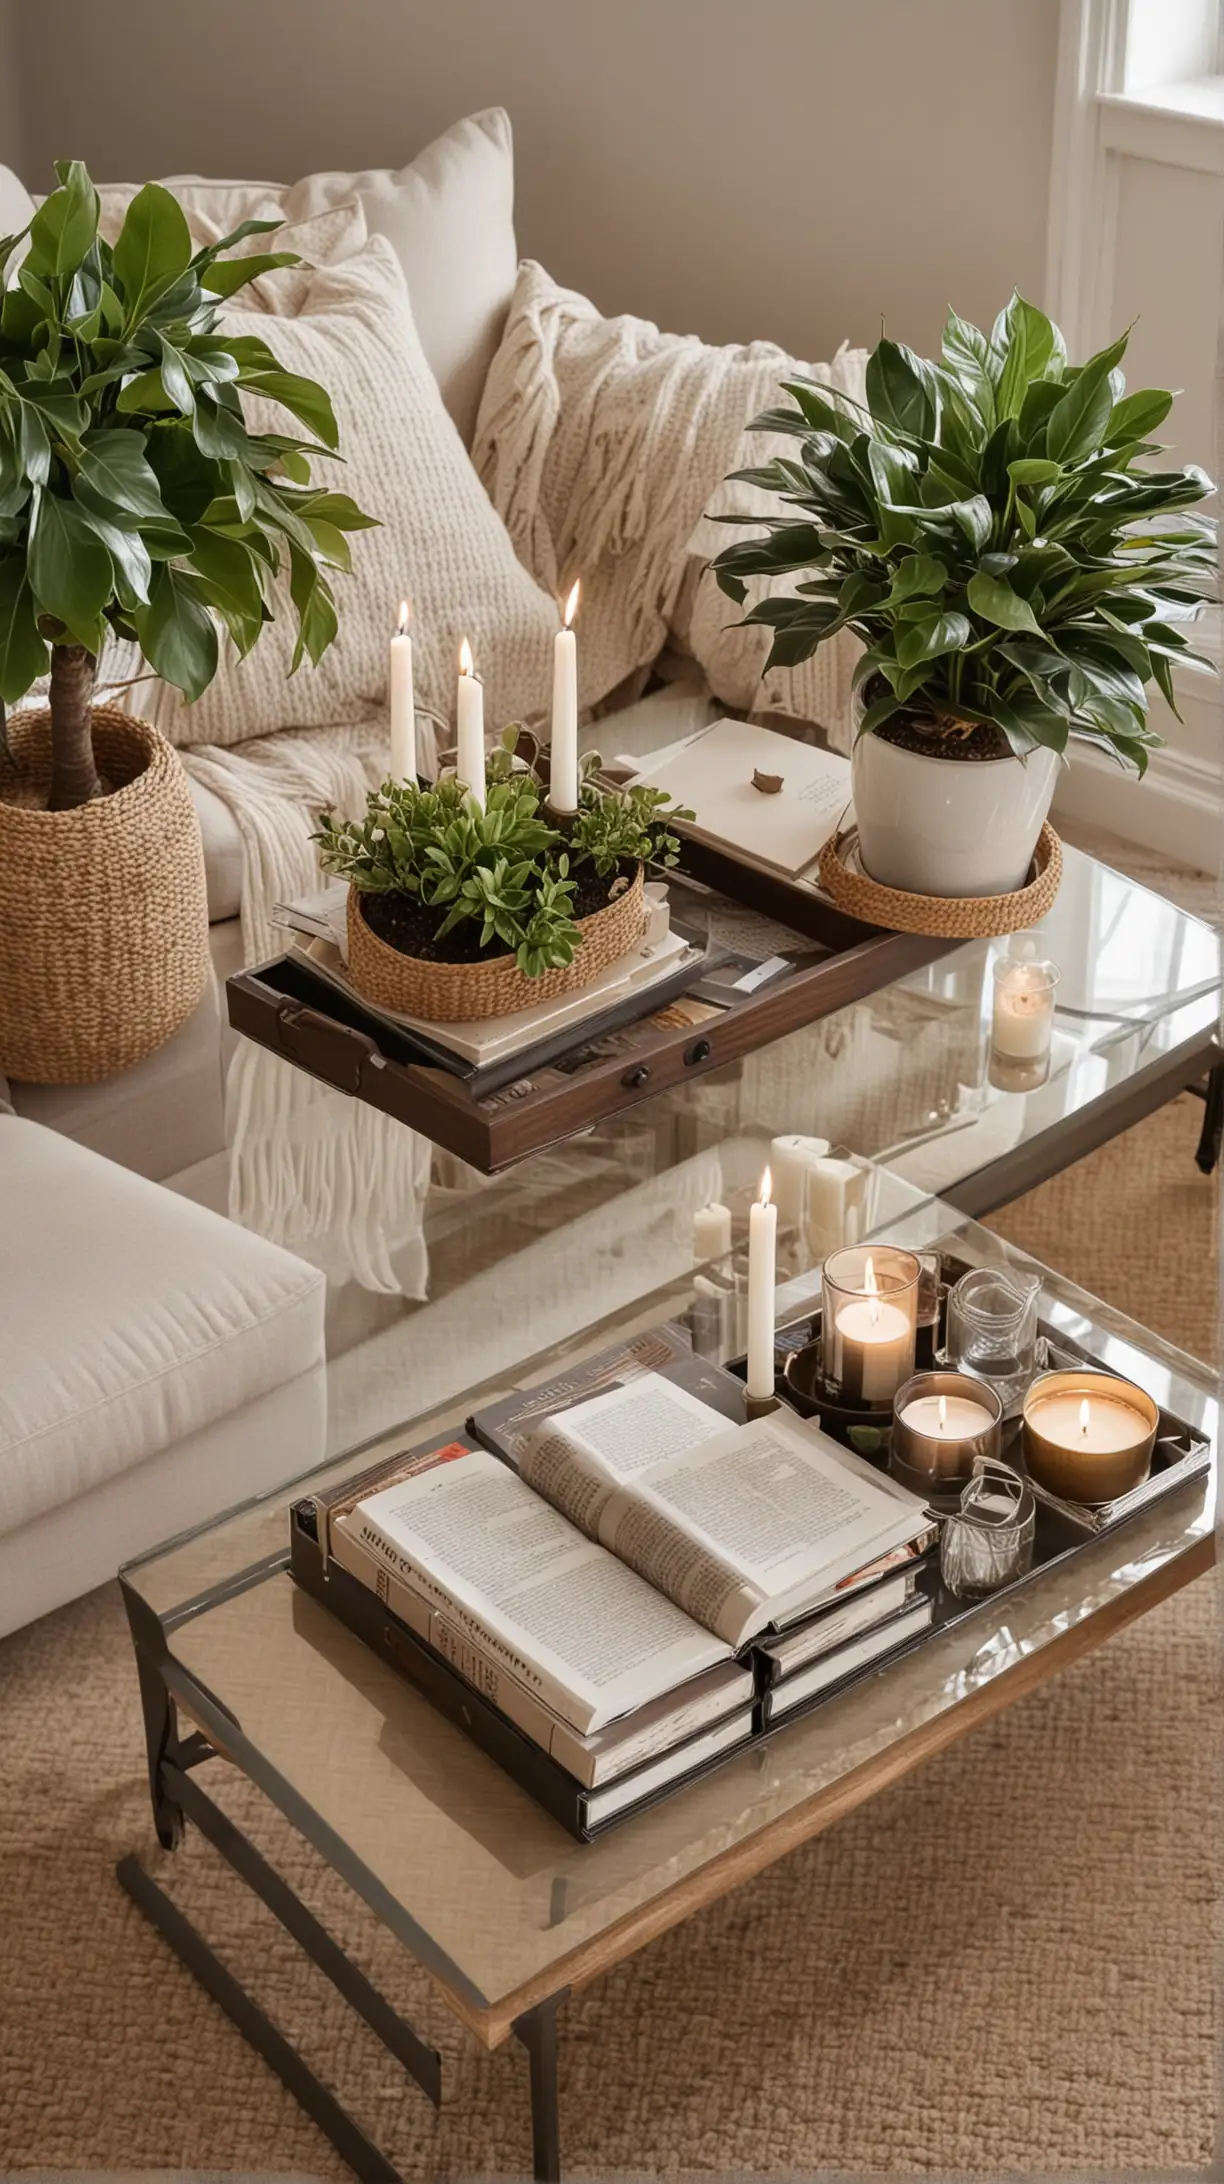 Chic Living Room Coffee Table Decor with Books Candles and Plant